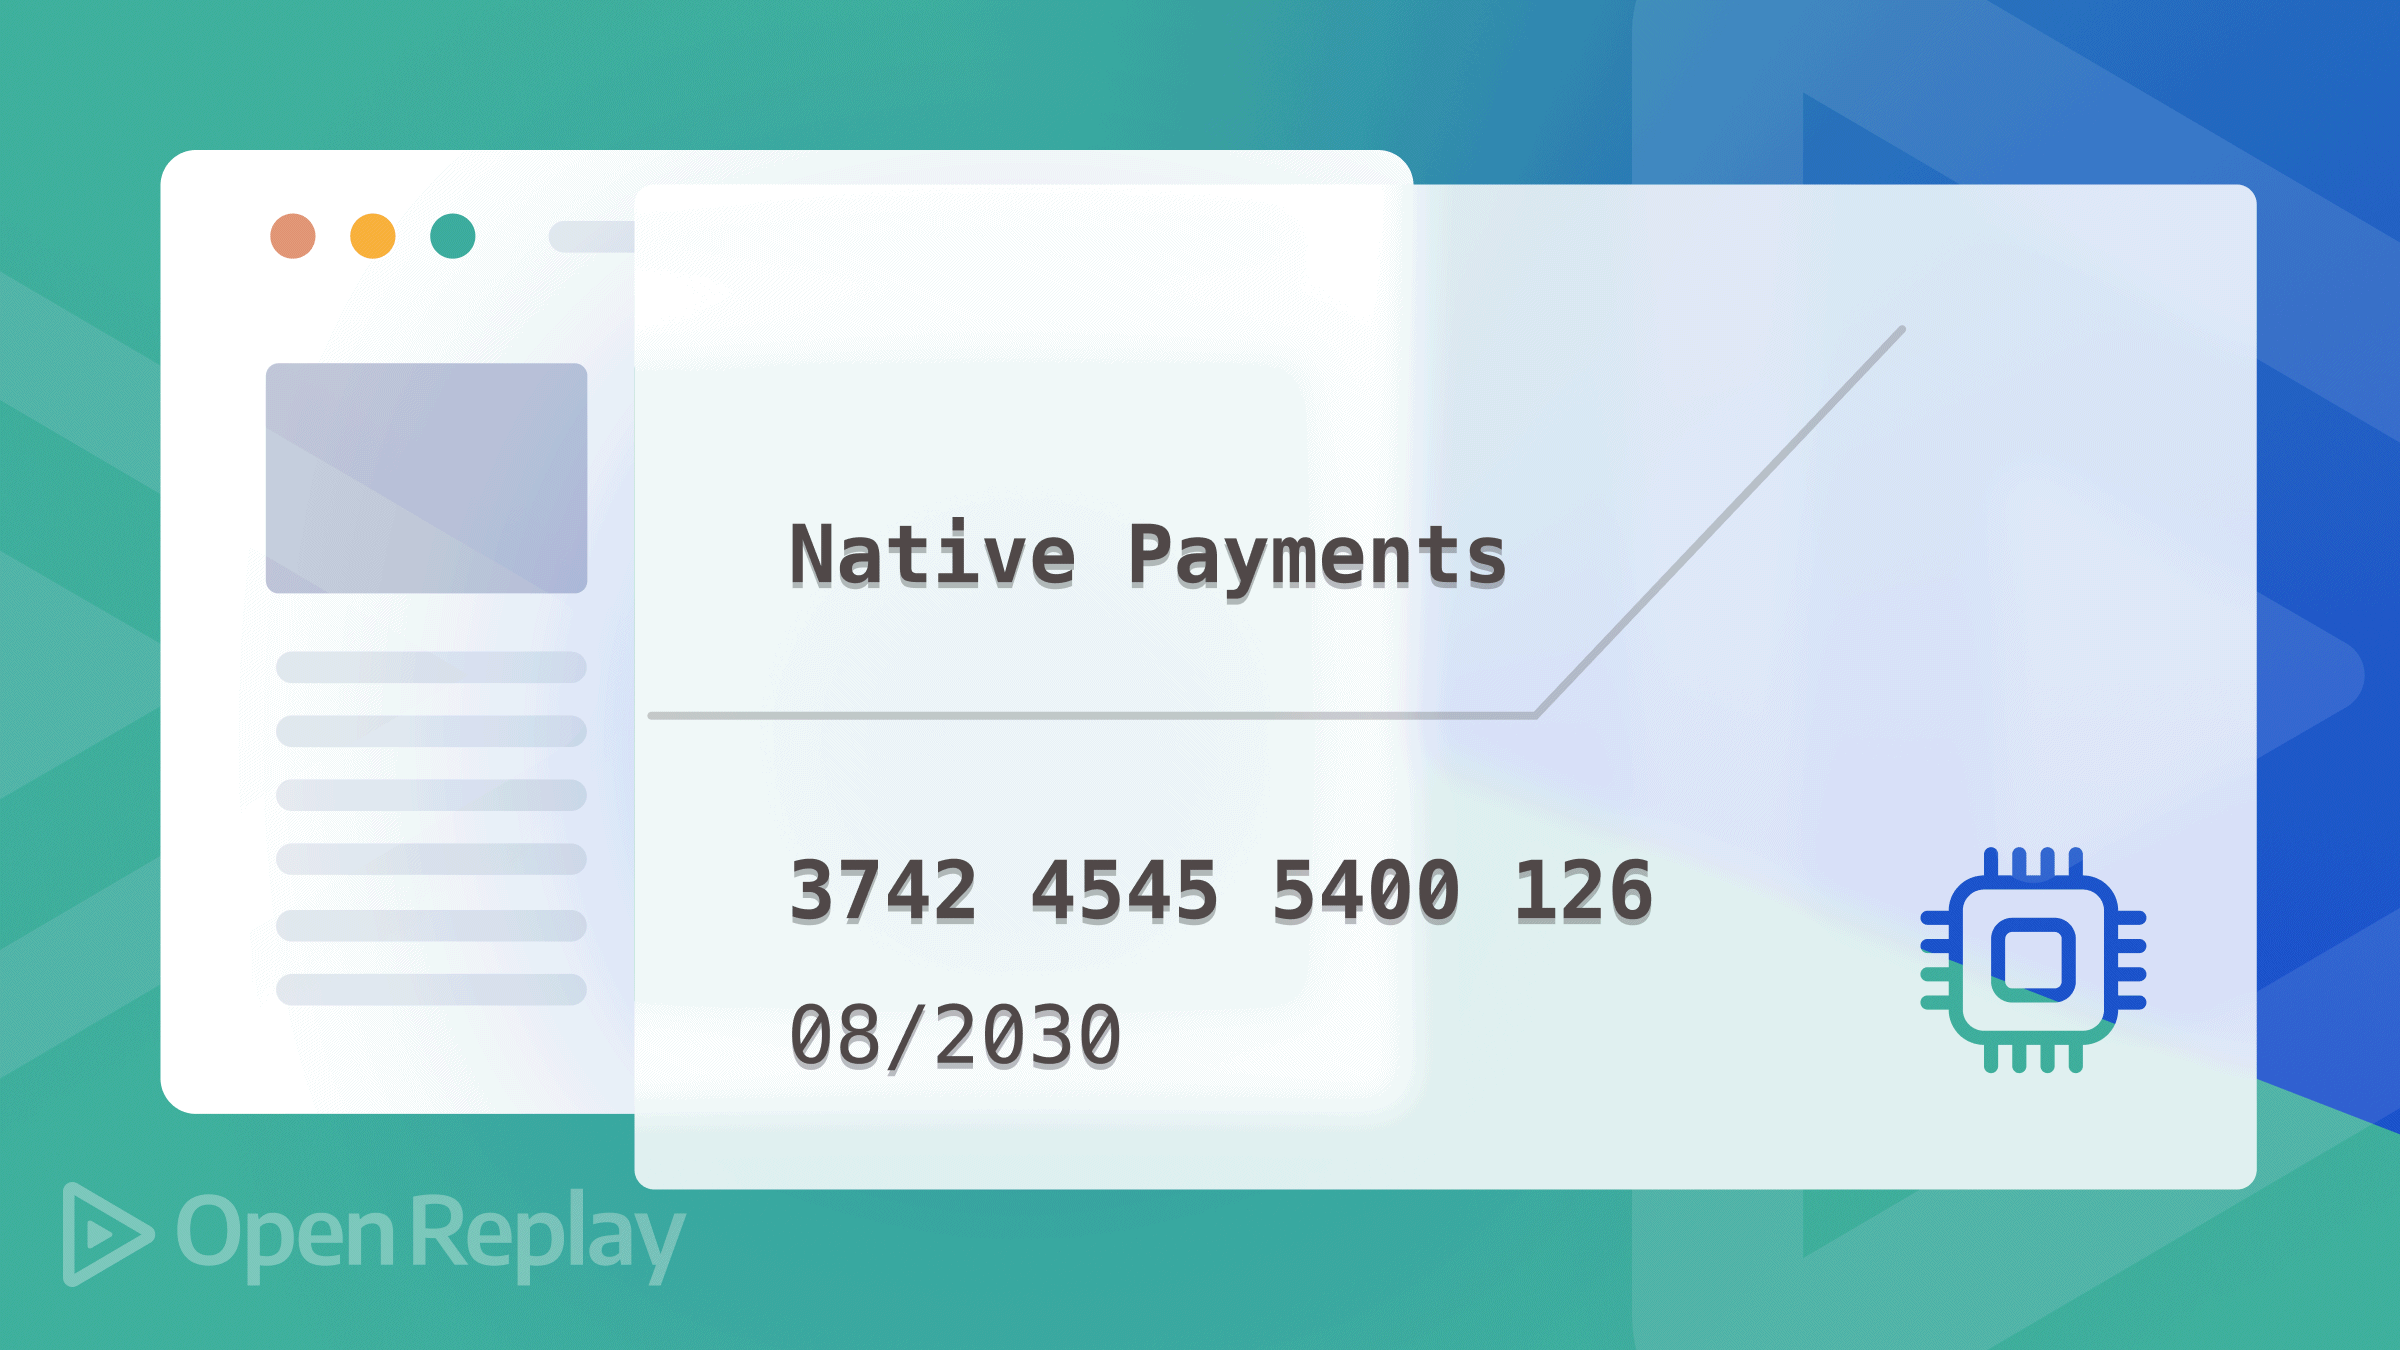 Using the native payment request JavaScript API